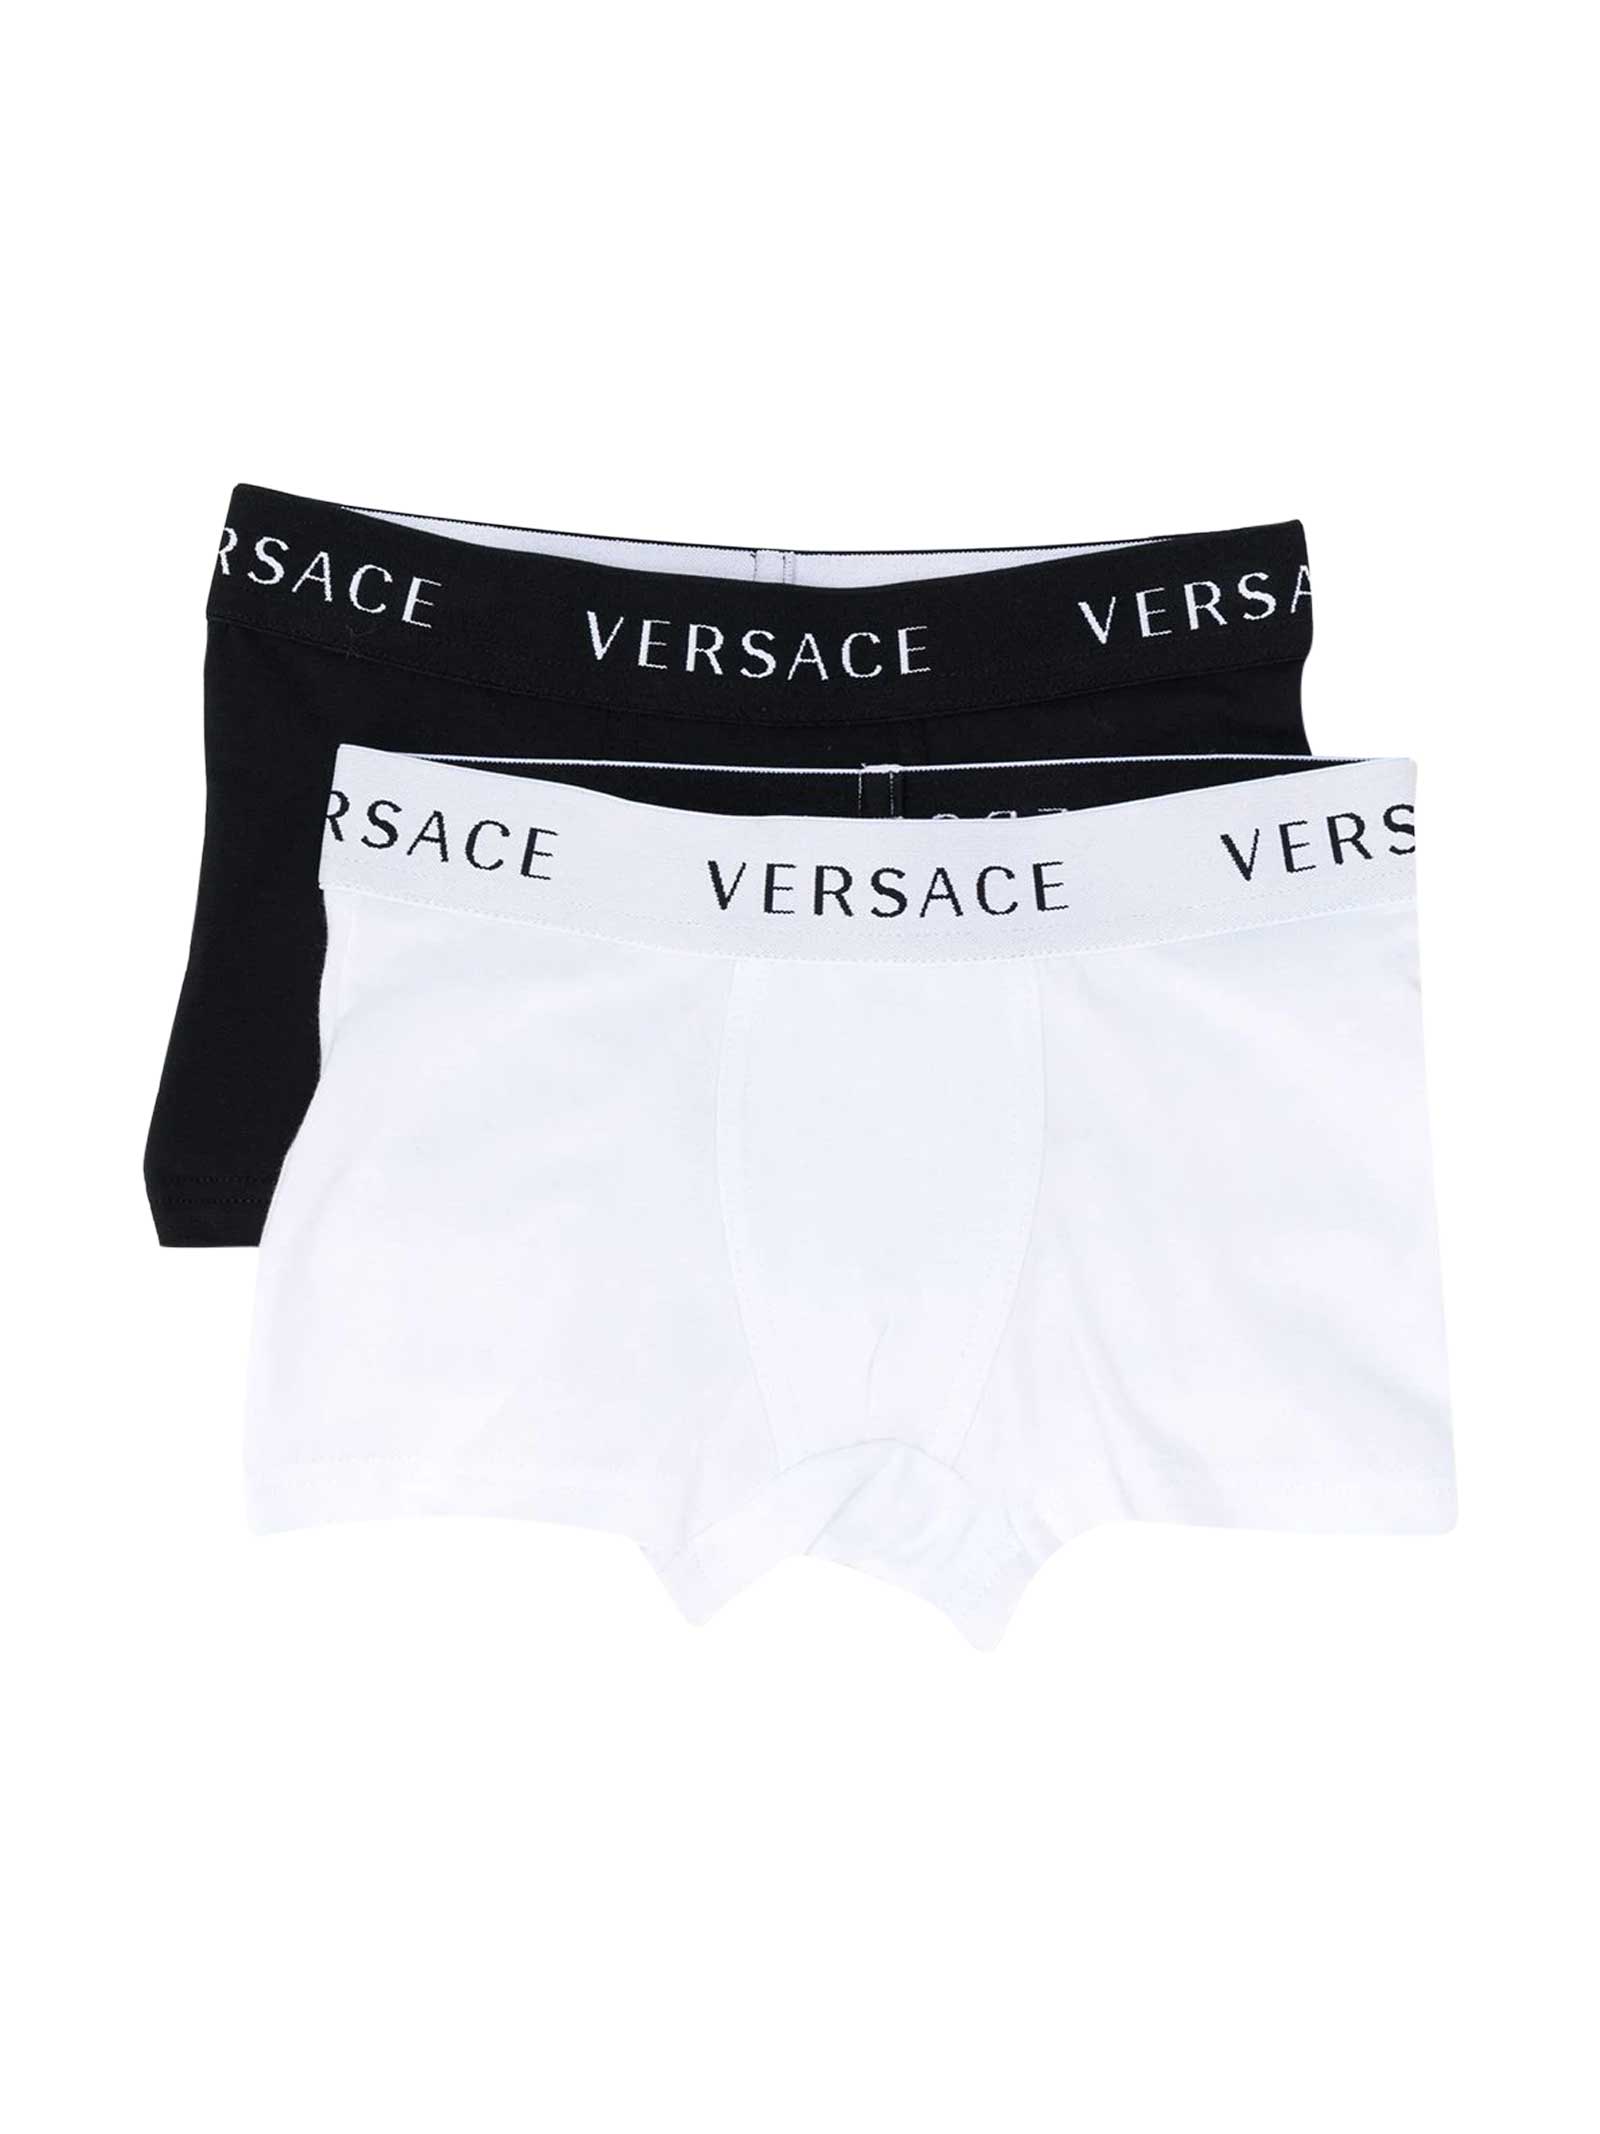 Versace Black And White Slips Set With Young Print